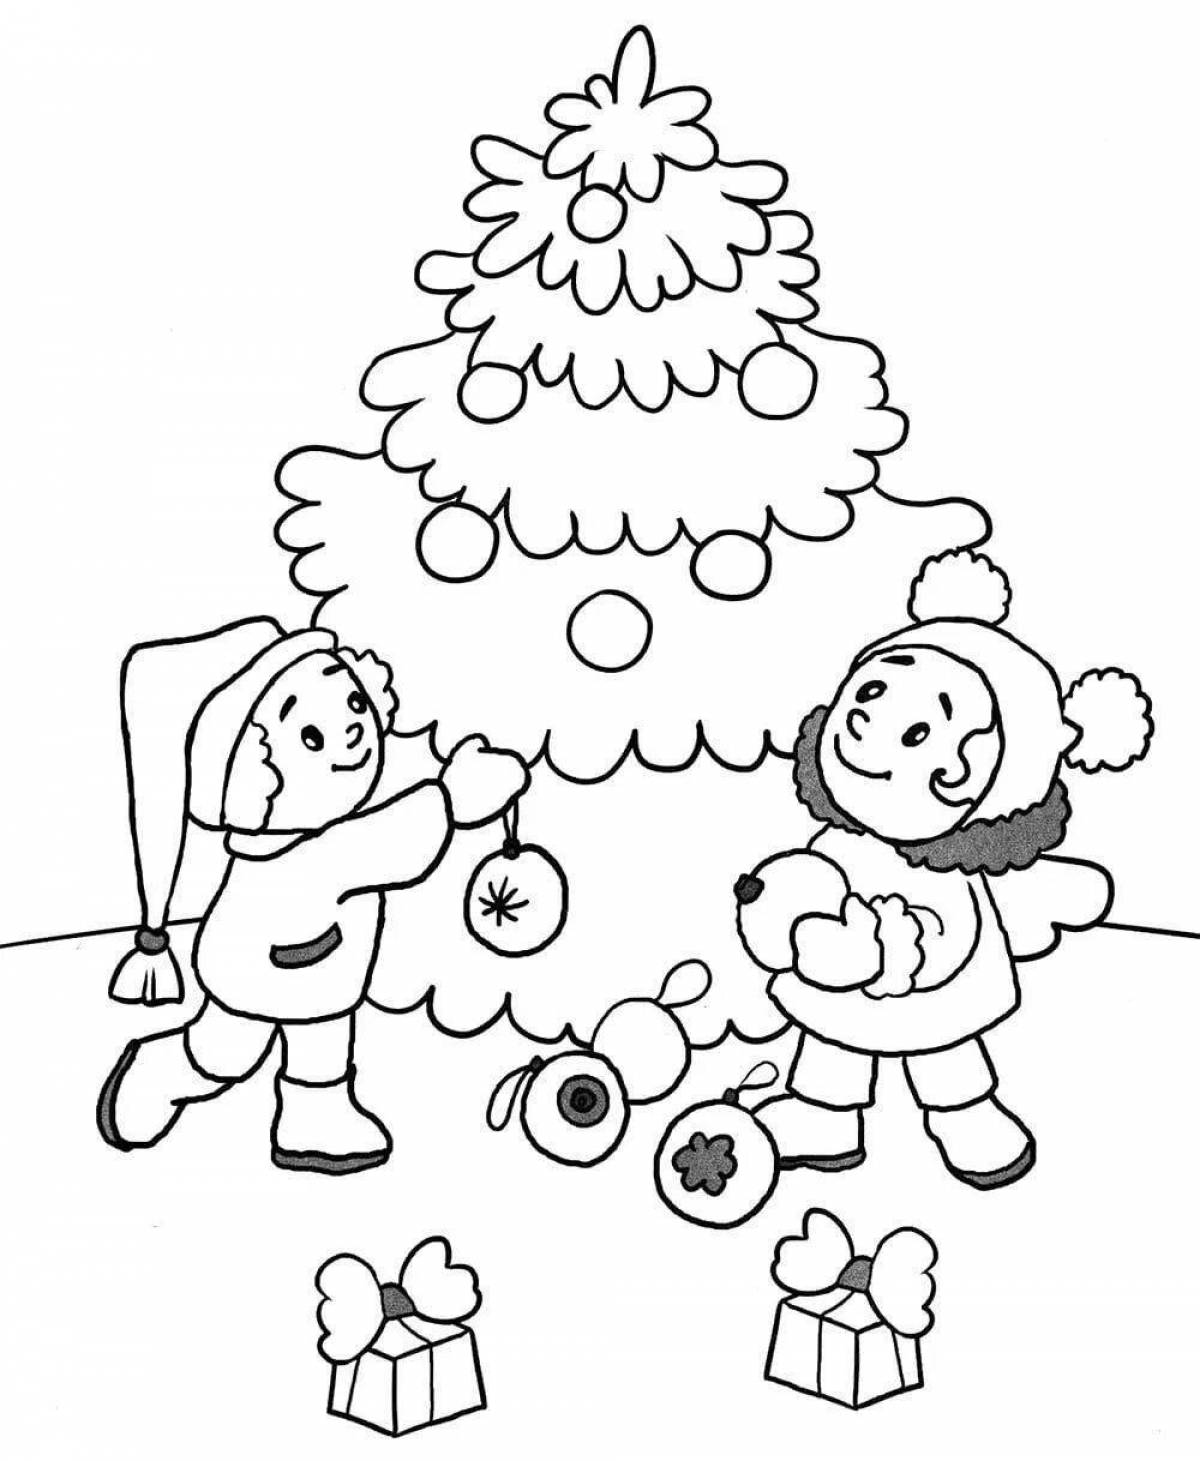 Coloring page enthusiastic dance around the tree